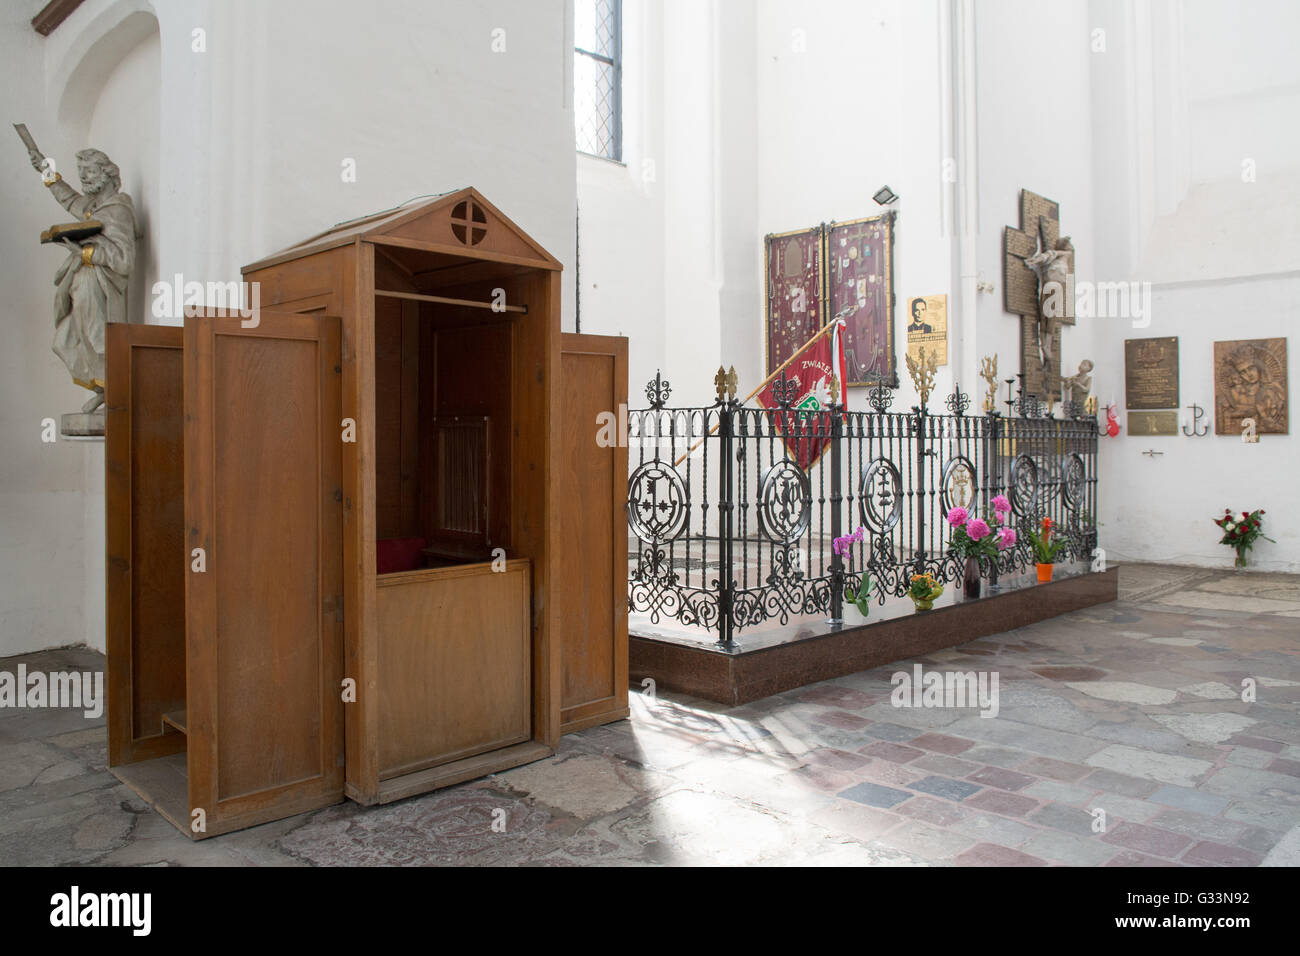 Confession Confessional box booth inside St Marys Church, Gdansk, Poland, Europe Stock Photo